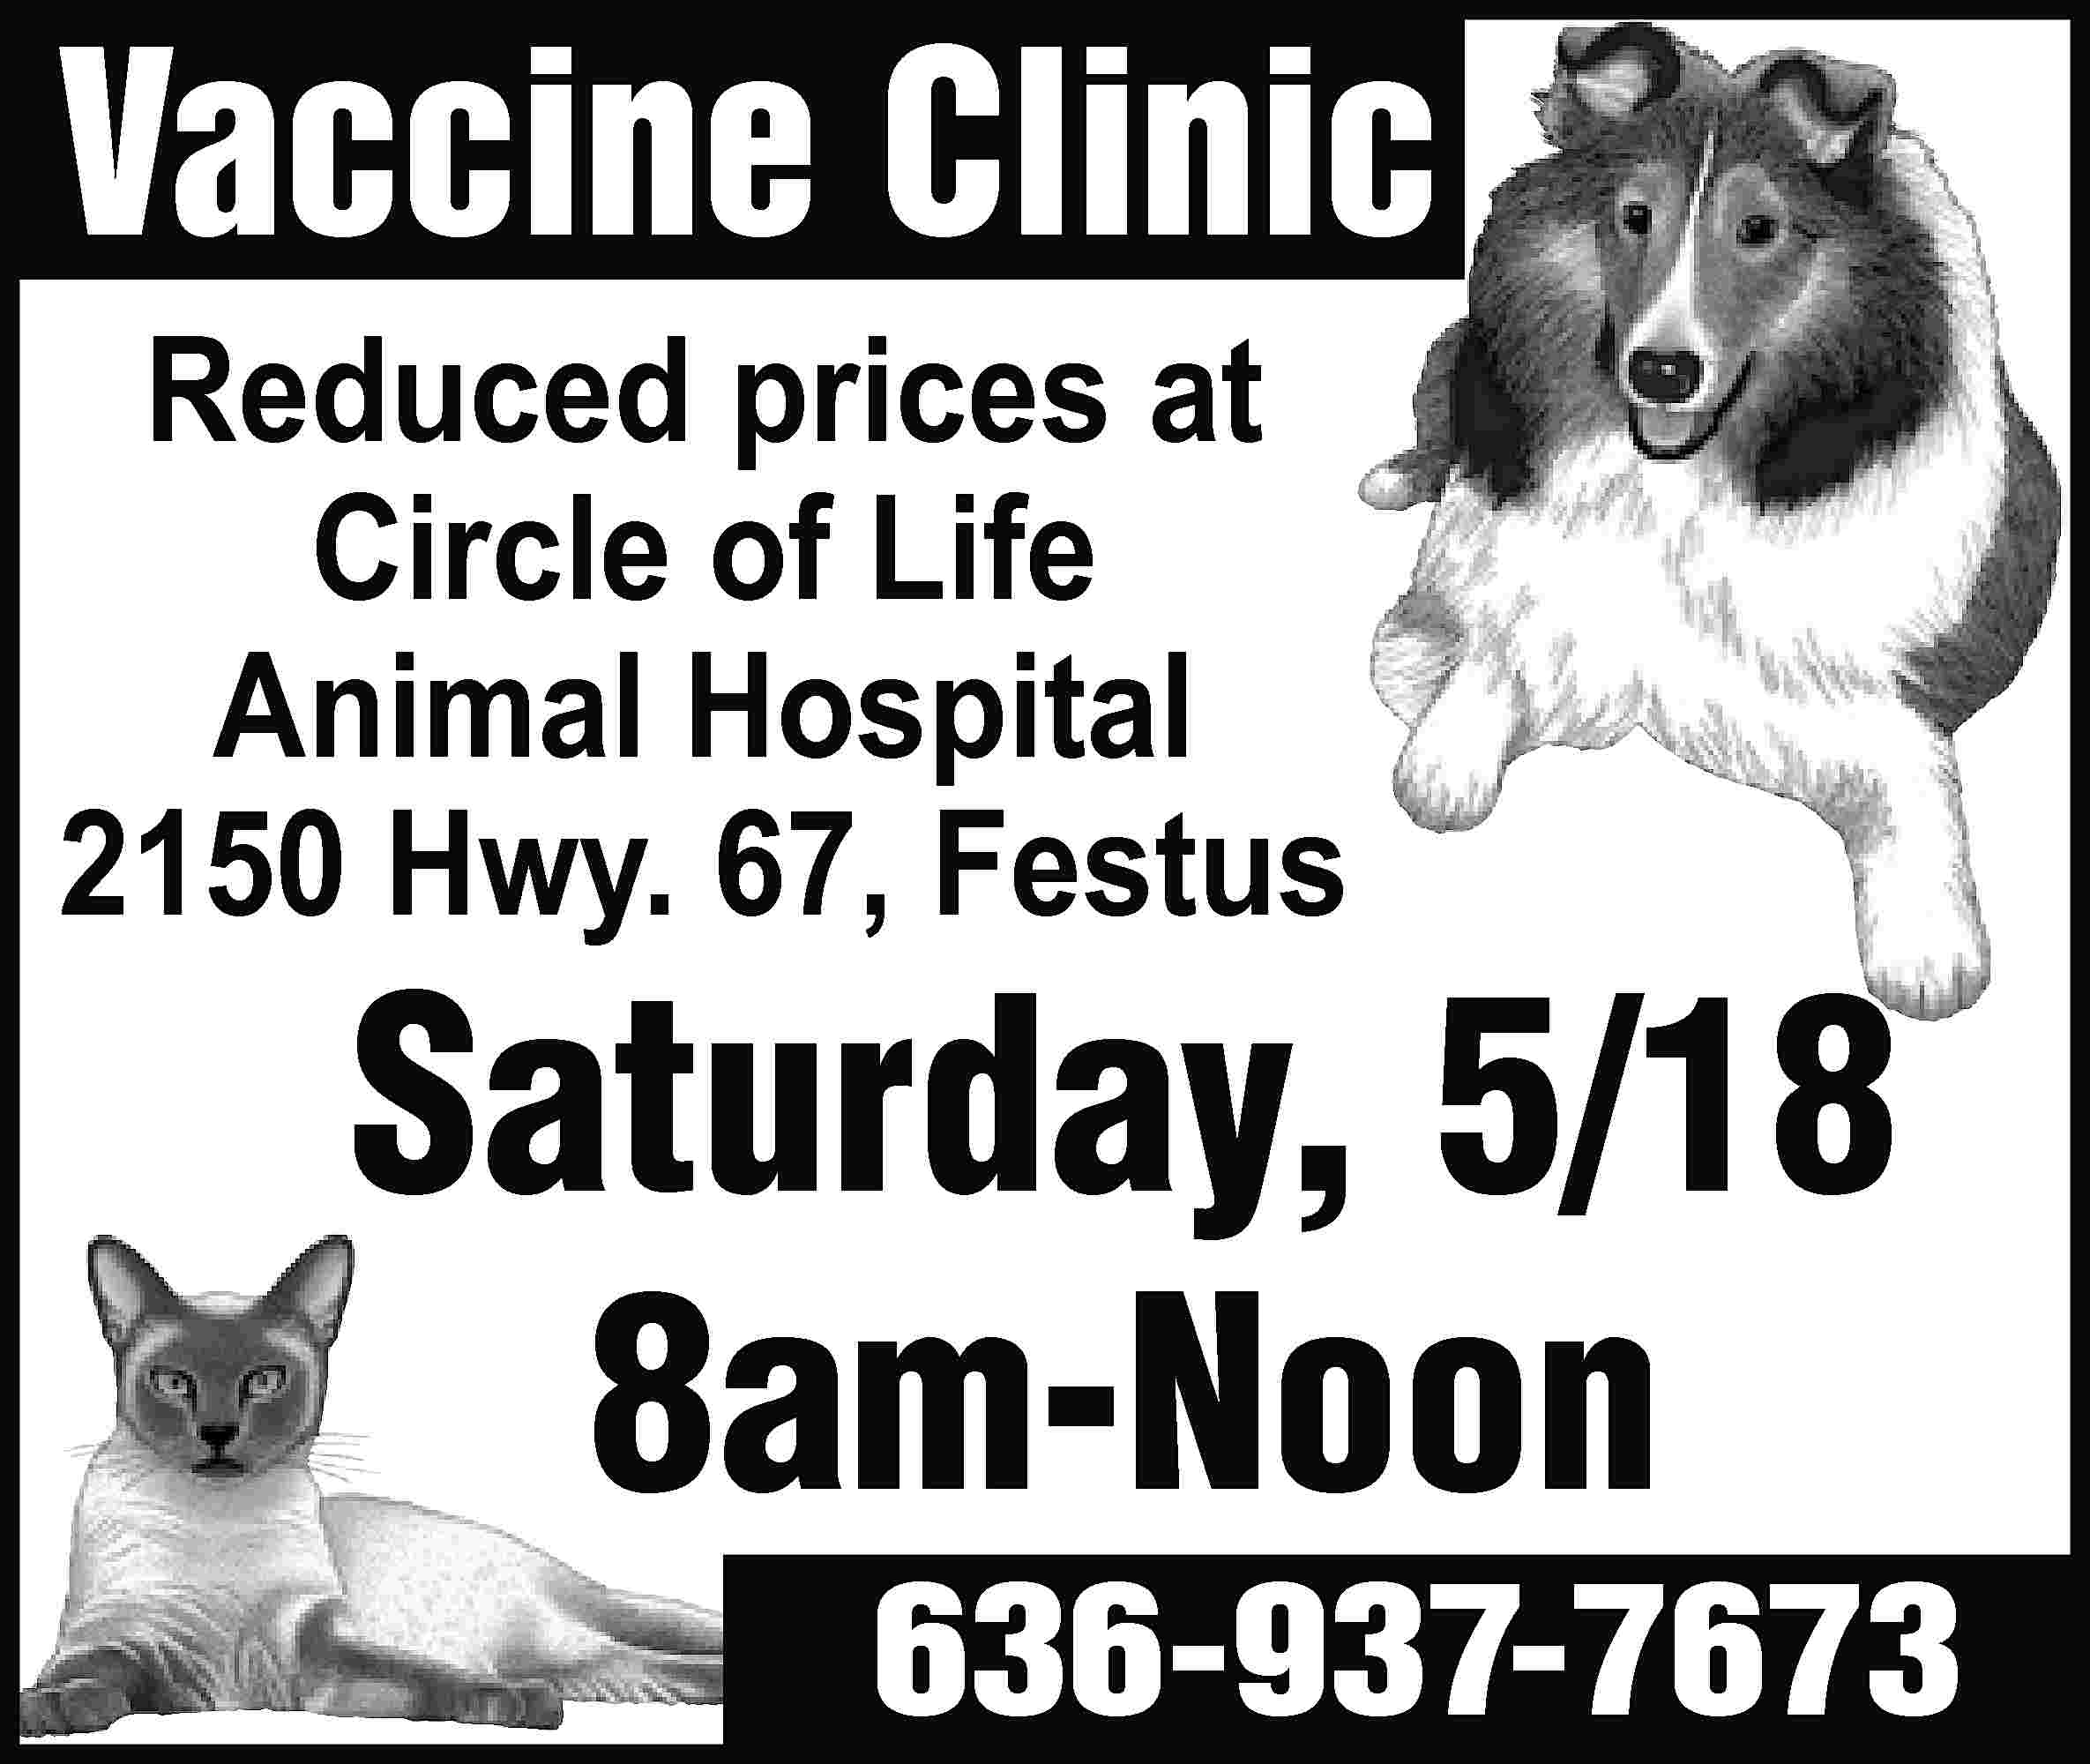 Vaccine Clinic Reduced prices at  Vaccine Clinic Reduced prices at Circle of Life Animal Hospital 2150 Hwy. 67, Festus Saturday, 5/18 8am-Noon 636-937-7673